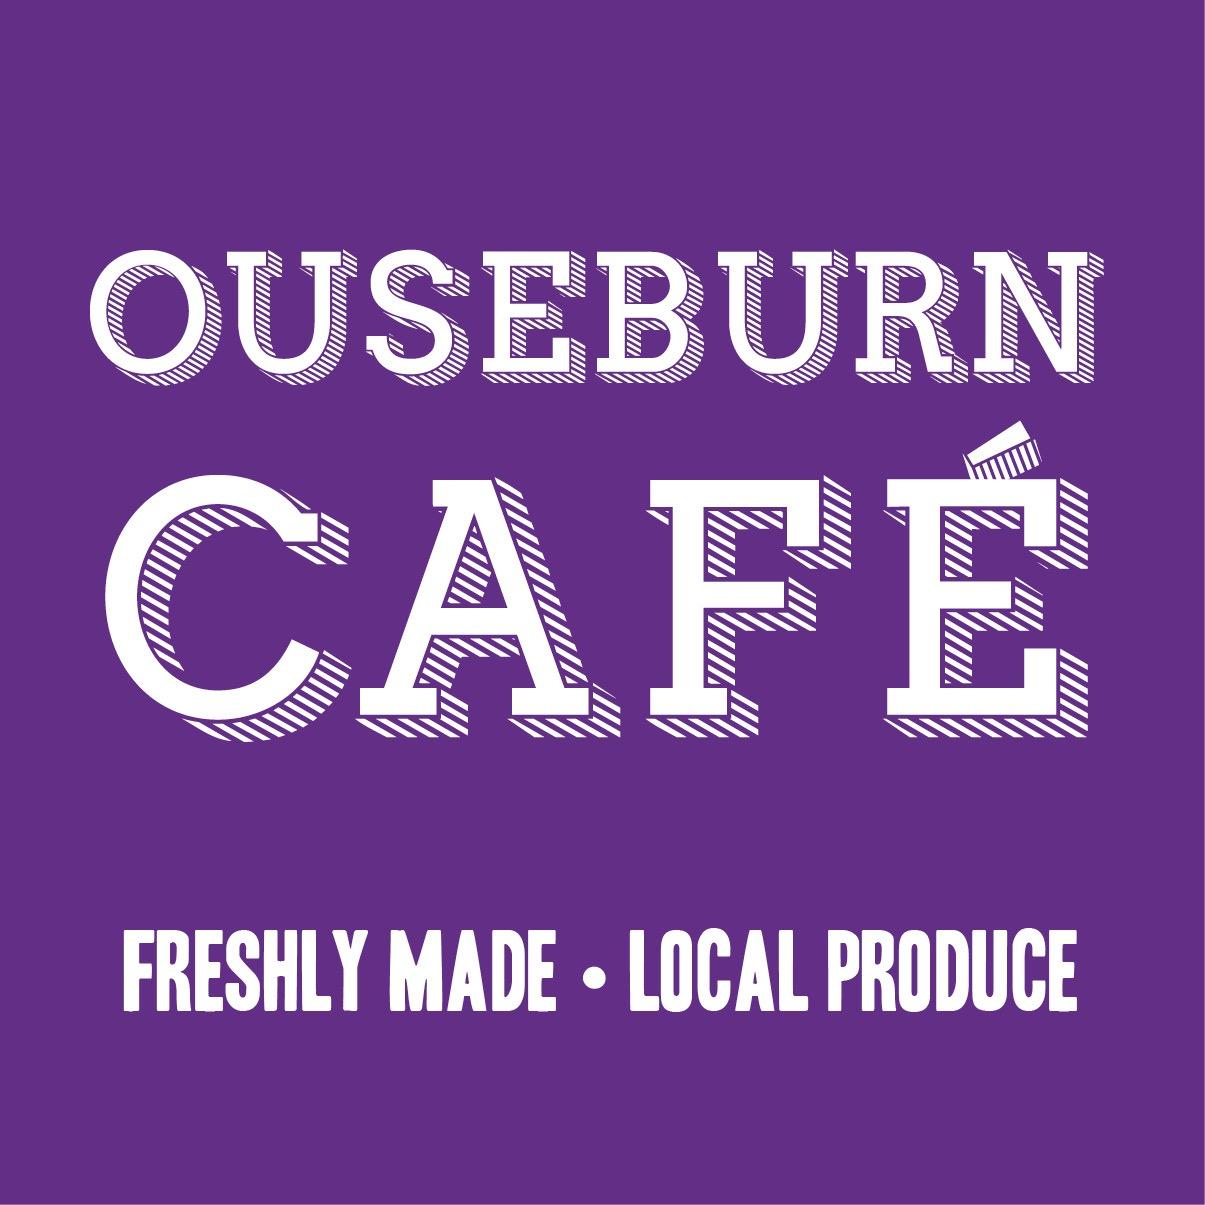 Café serving the Ouseburn Valley and beyond, with fresh hot and cold food, every day.